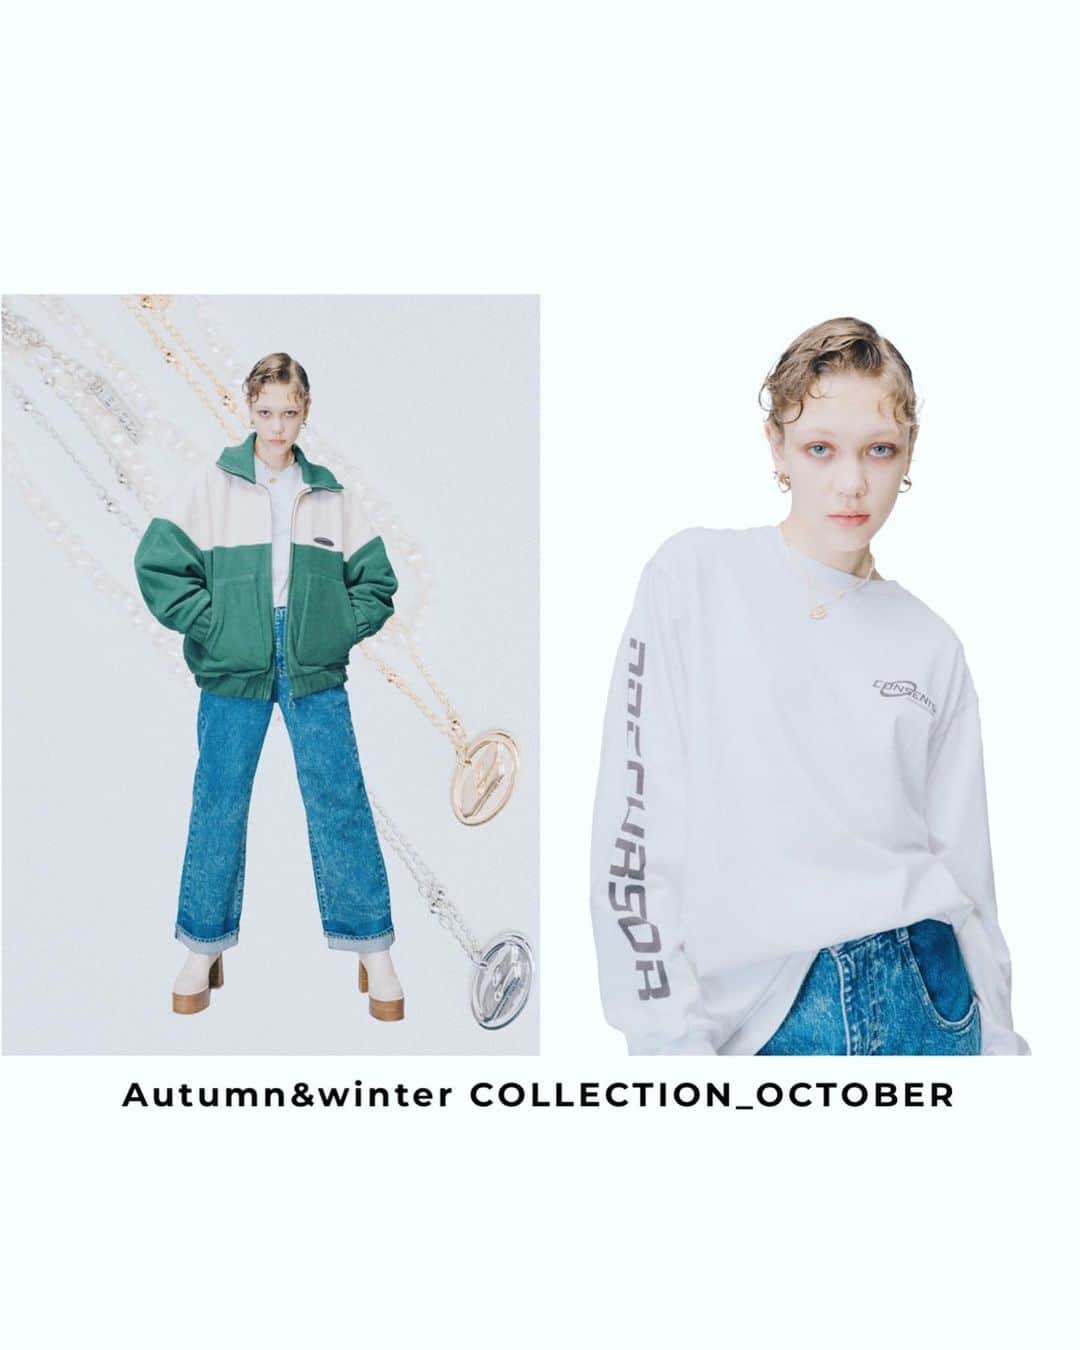 EMODAさんのインスタグラム写真 - (EMODAInstagram)「ㅤㅤㅤㅤㅤㅤㅤㅤㅤㅤㅤㅤ '23 autumn&winter October new item ㅤㅤㅤ  ・RIB COLLAR FLEECE BLOUSON ￥ 12,980 tax'in ・FRONT LOGO OVER T/S ￥ 5,940 tax'in ・2TONE LOOSE H/W JEANS ￥ 14,080 tax'in ・SIDE GORE ROUND BOOTS ￥ 16,280 tax'in ・MARK POINT PEARL NC ￥ 4,950 tax'in ・MARK POINT PIERCE ￥ 3,960 tax'in ＿＿＿＿＿＿＿＿＿＿＿＿＿＿＿＿＿＿＿＿＿＿＿＿ ◆◆MAX94%OFF◆◆ Limited OUTLET SALE開催中！！  ＞衝撃プライス＜ 人気アイテムが今だけスーパーセール価格に!!!! 10/6(FRI)12:00～10/10(TUE)23:59  詳細は( @emoda_official )のTOPのURL,storiesチェック✔️ ＿＿＿＿＿＿＿＿＿＿＿＿＿＿＿＿＿＿＿＿＿＿＿＿ㅤㅤ ㅤㅤㅤㅤㅤㅤ #EMODA #EMODA_OUTER #EMODA_JEANS #EMODA_SHOES #boots #フリースブルゾン #フリース #オーバーサイズブルゾン #ロゴロンT #ロングスリーブロンT #ワイドデニム #ルーズデニム #ショートブーツ #RUNWAYchannel #2023AW #autumn #winter @emoda_snap」10月8日 23時17分 - emoda_official